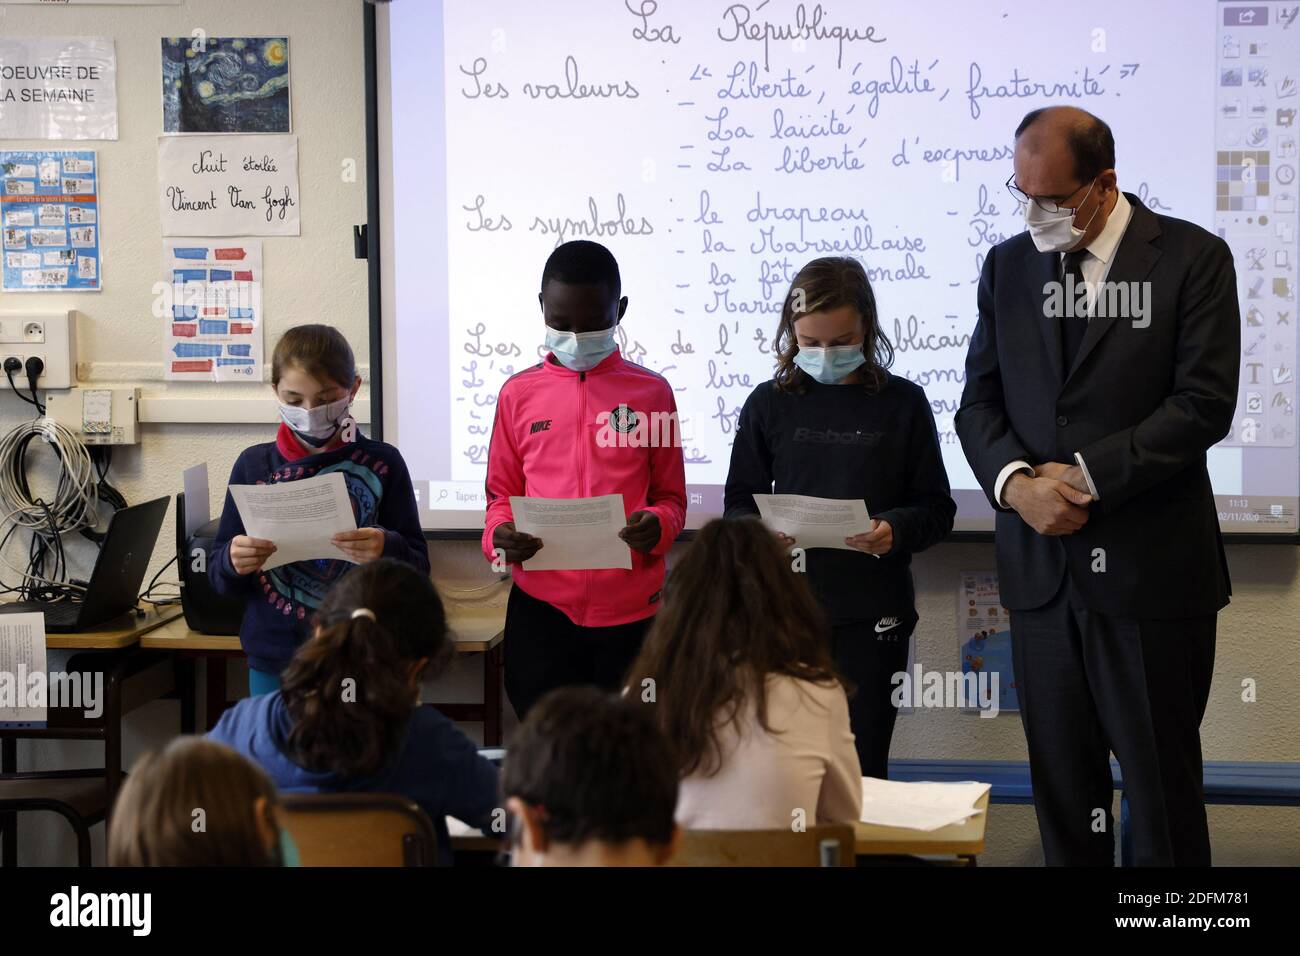 French Prime Minister Jean Castex (R) attends a homage to slained French history teacher Samuel Paty, on November 2, 2020 at a school in Conflans Sainte-Honorine, as France honours the teacher beheaded in front of his school by a suspected Islamist radical. - Schoolchildren across France were to observe a minute of silence at 11:00 am (1000 GMT, as students returned to classes after the autumn break, to remember Samuel Paty, who was killed in Conflans-Sainte-Honorine, outside Paris, on October 16 just as the holiday began. Paty had shown his class a cartoon of the prophet Mohammed for a lesson Stock Photo